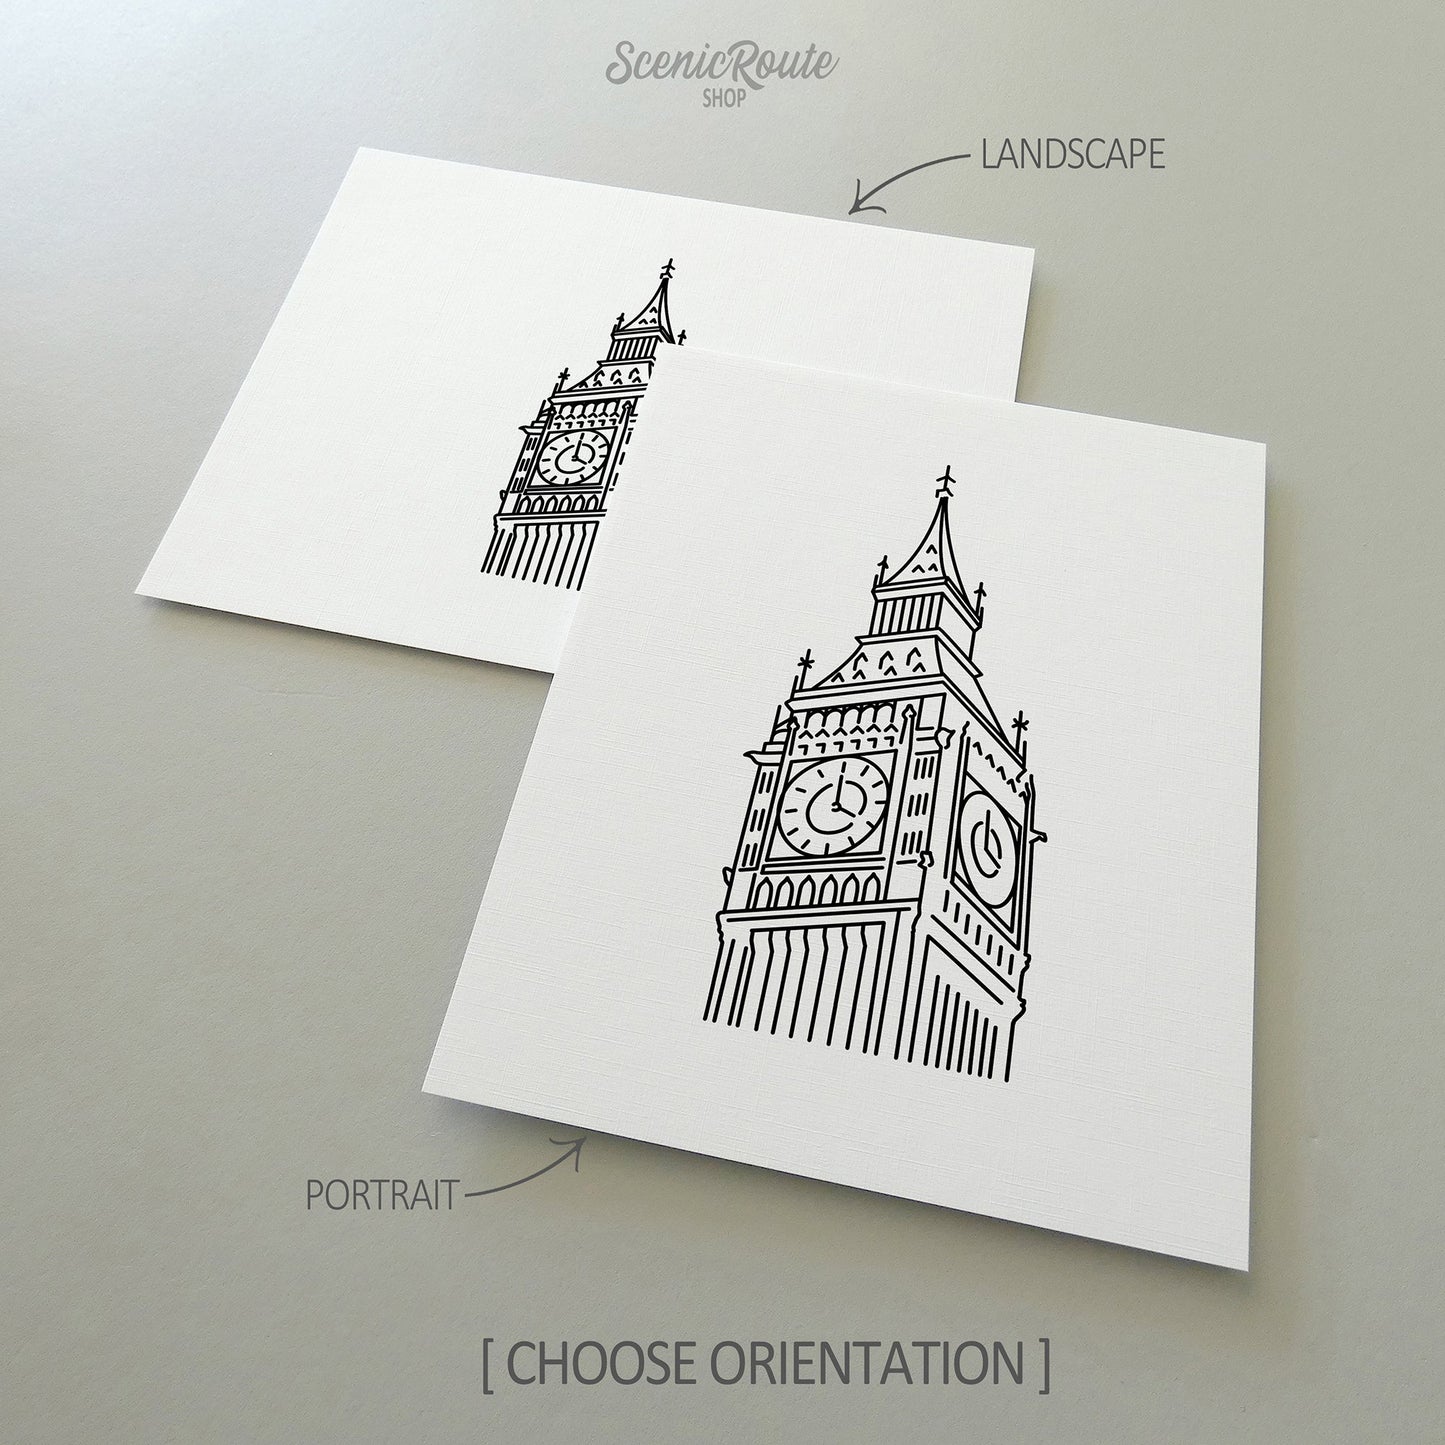 Two line art drawings of Big Ben on white linen paper with a gray background.  The pieces are shown in portrait and landscape orientation for the available art print options.